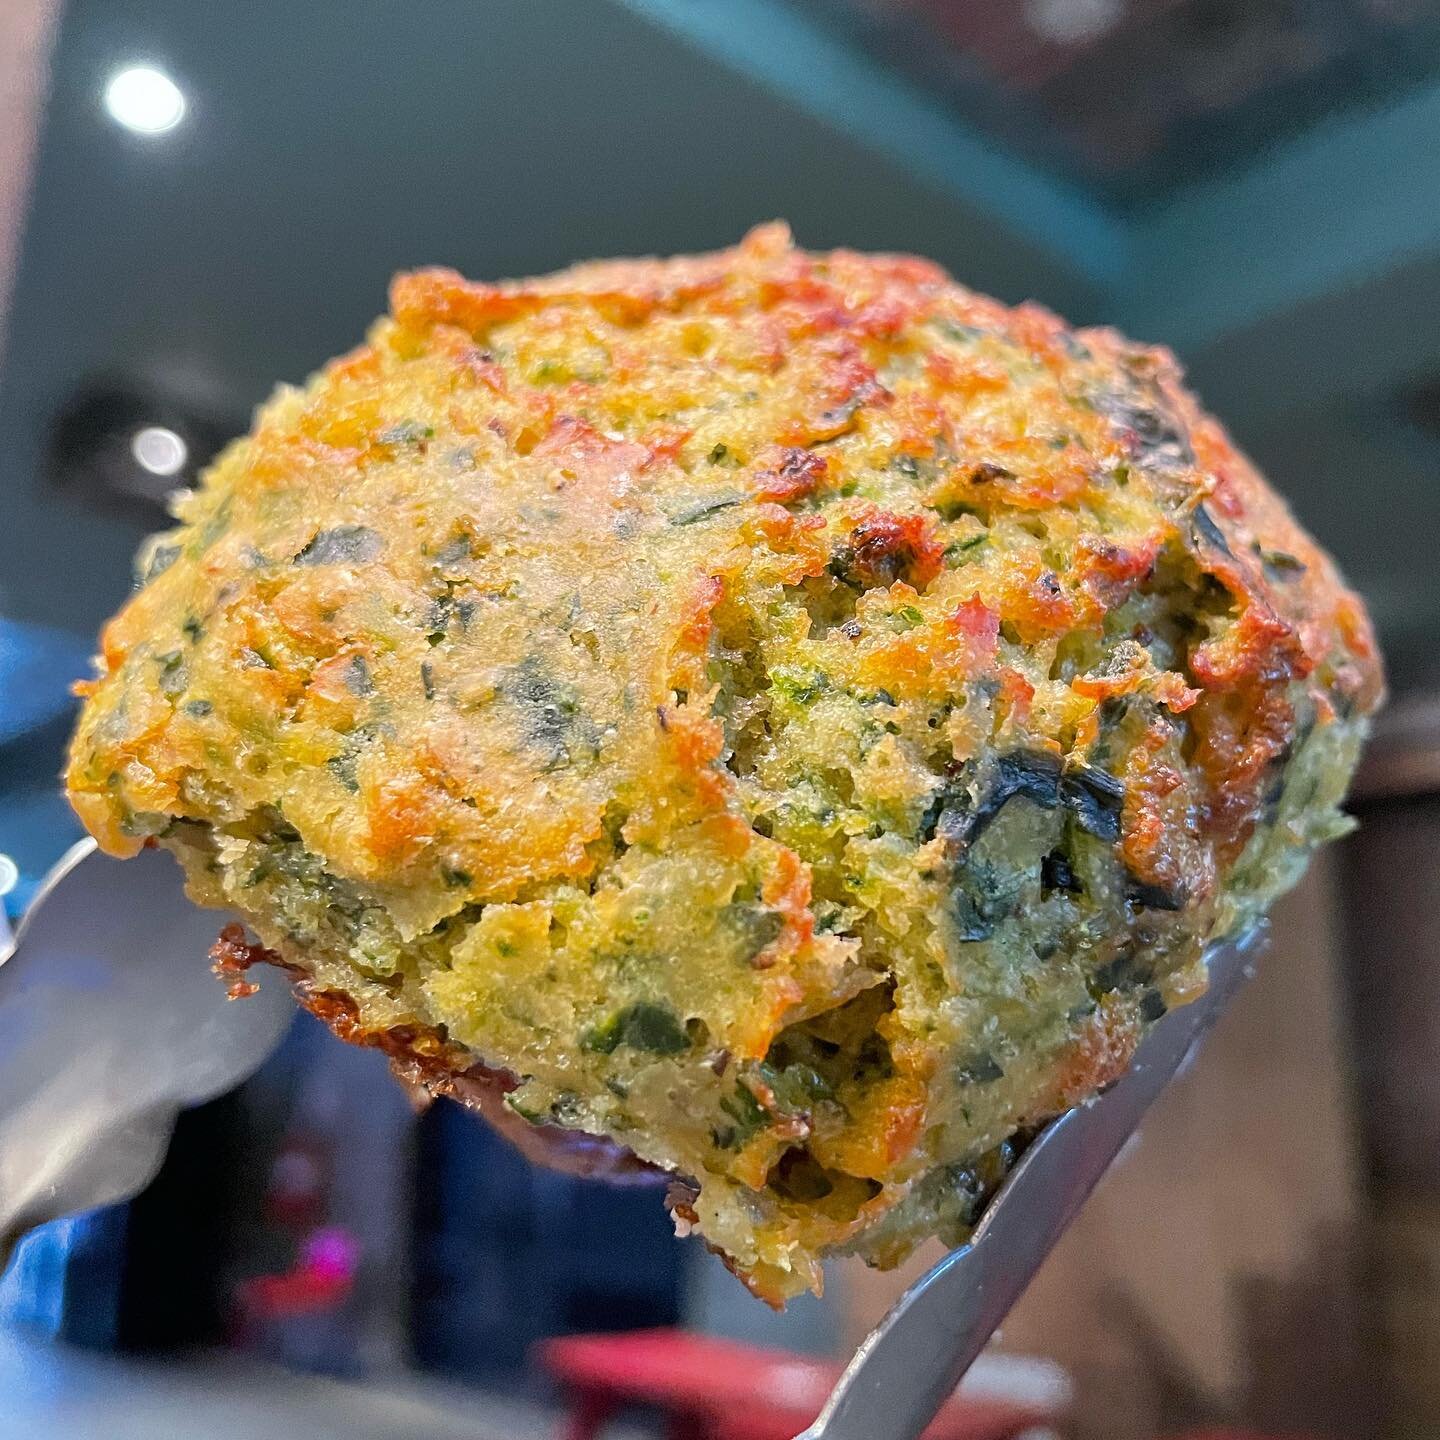 Cheddar is Better! Have you tried our savory Spinach Cheddar Biscuits that available at our shop?!
.
.
.
#cheddarisbetter #cheddarbiscuits #ozzyscoffee #thinkcoffeenyc